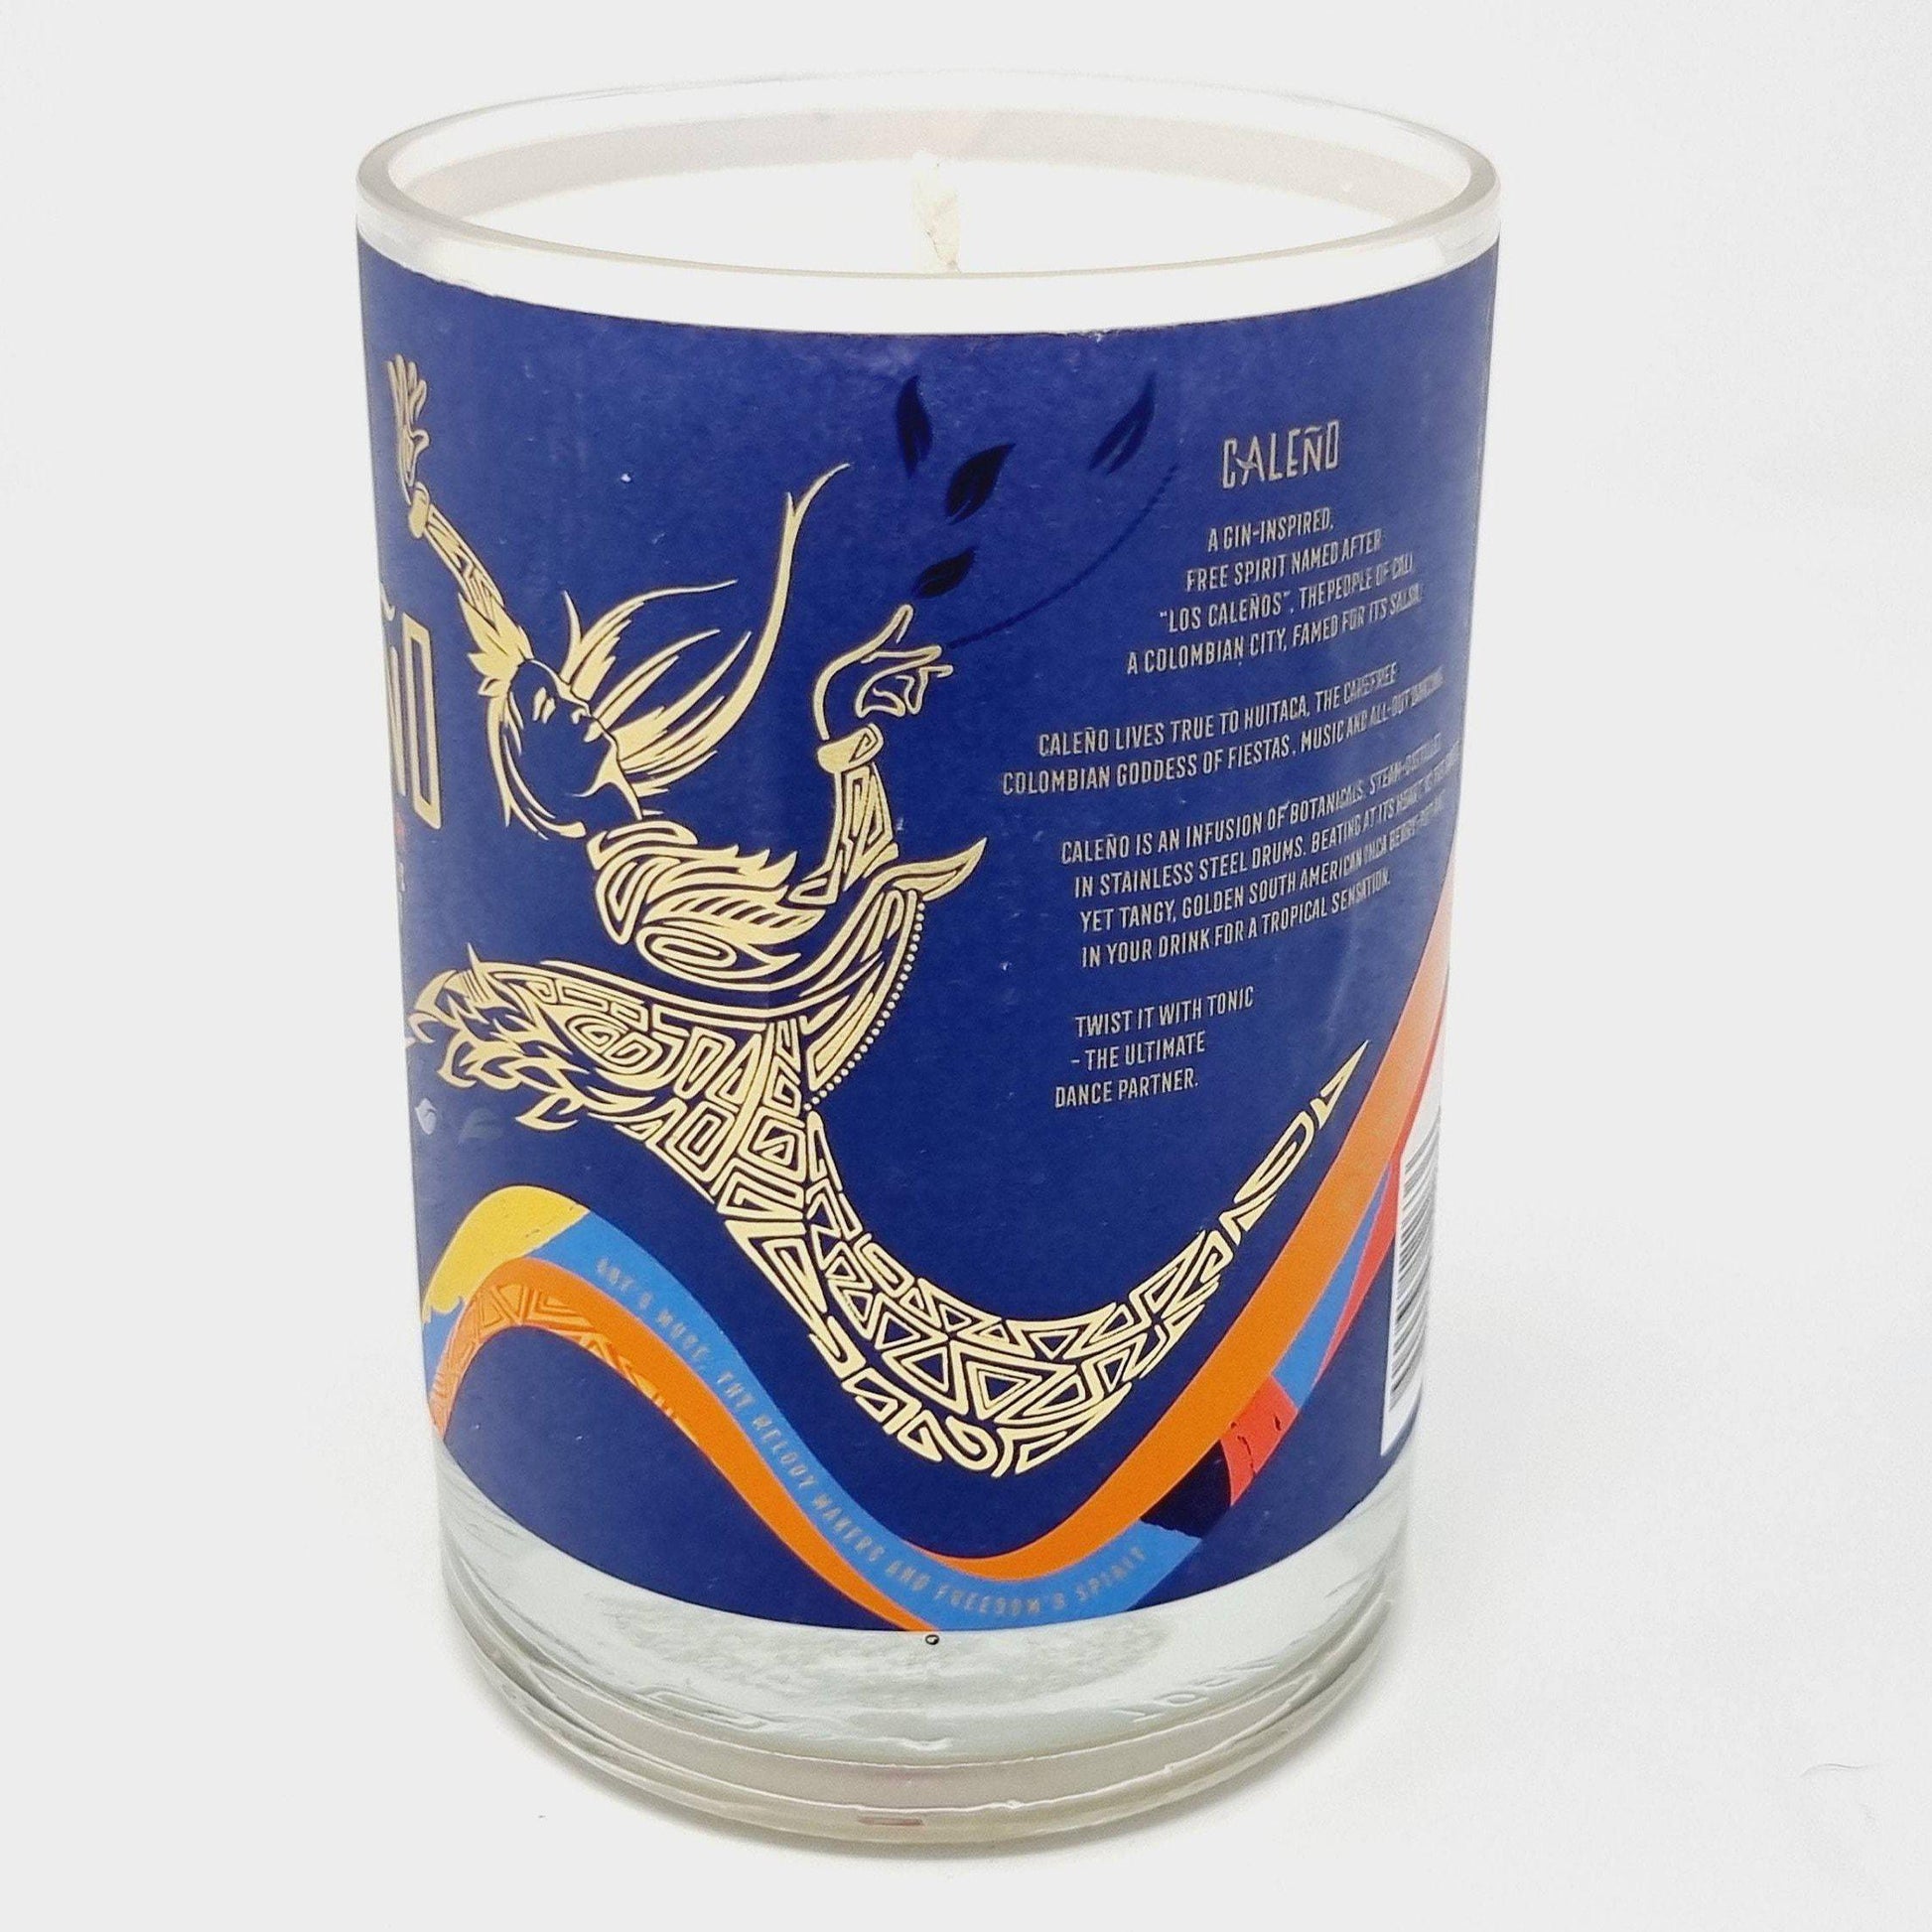 Caleno Non-Alcoholic Gin Bottle Candle Adhock Homeware